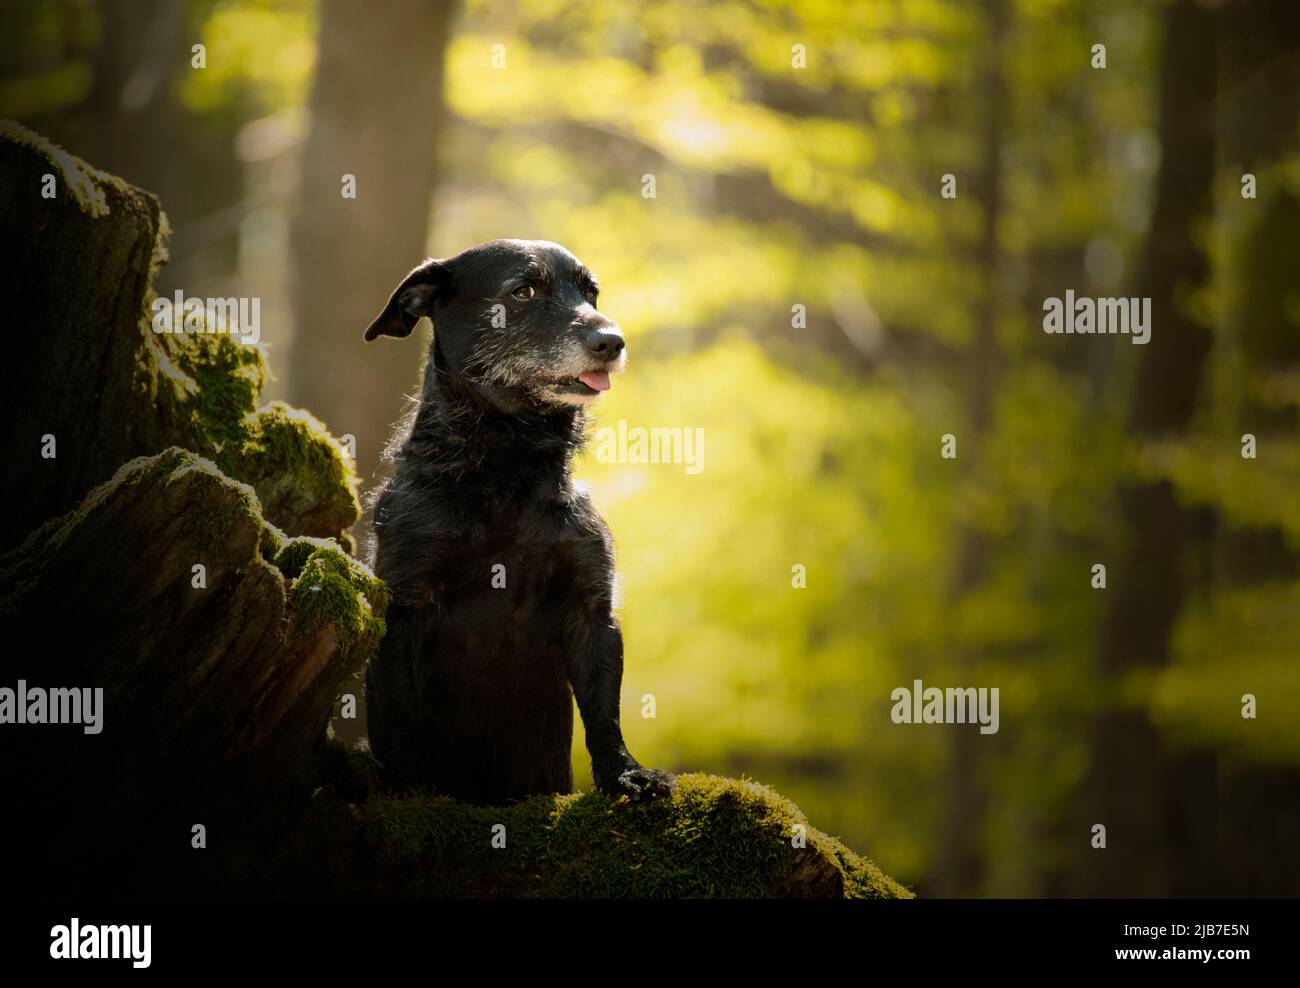 An older dog walking through the woods in spring weather. She likes to exhibit as a model. Stock Photo